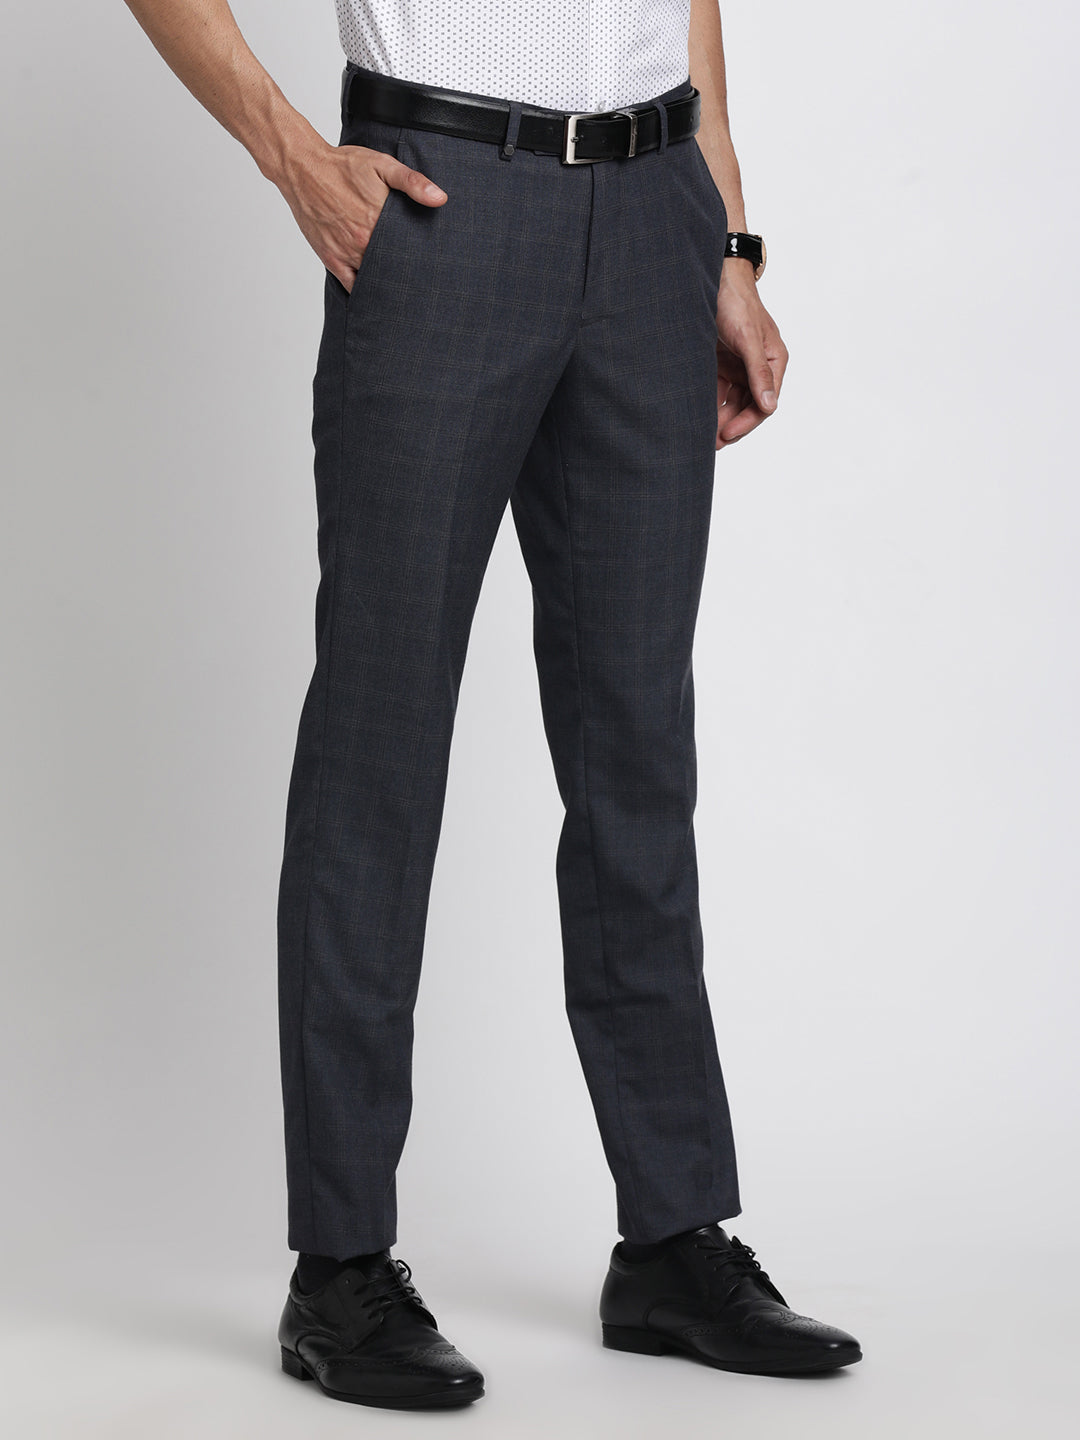 Terry Rayon Grey Dobby Slim Fit Flat Front Formal Trouser